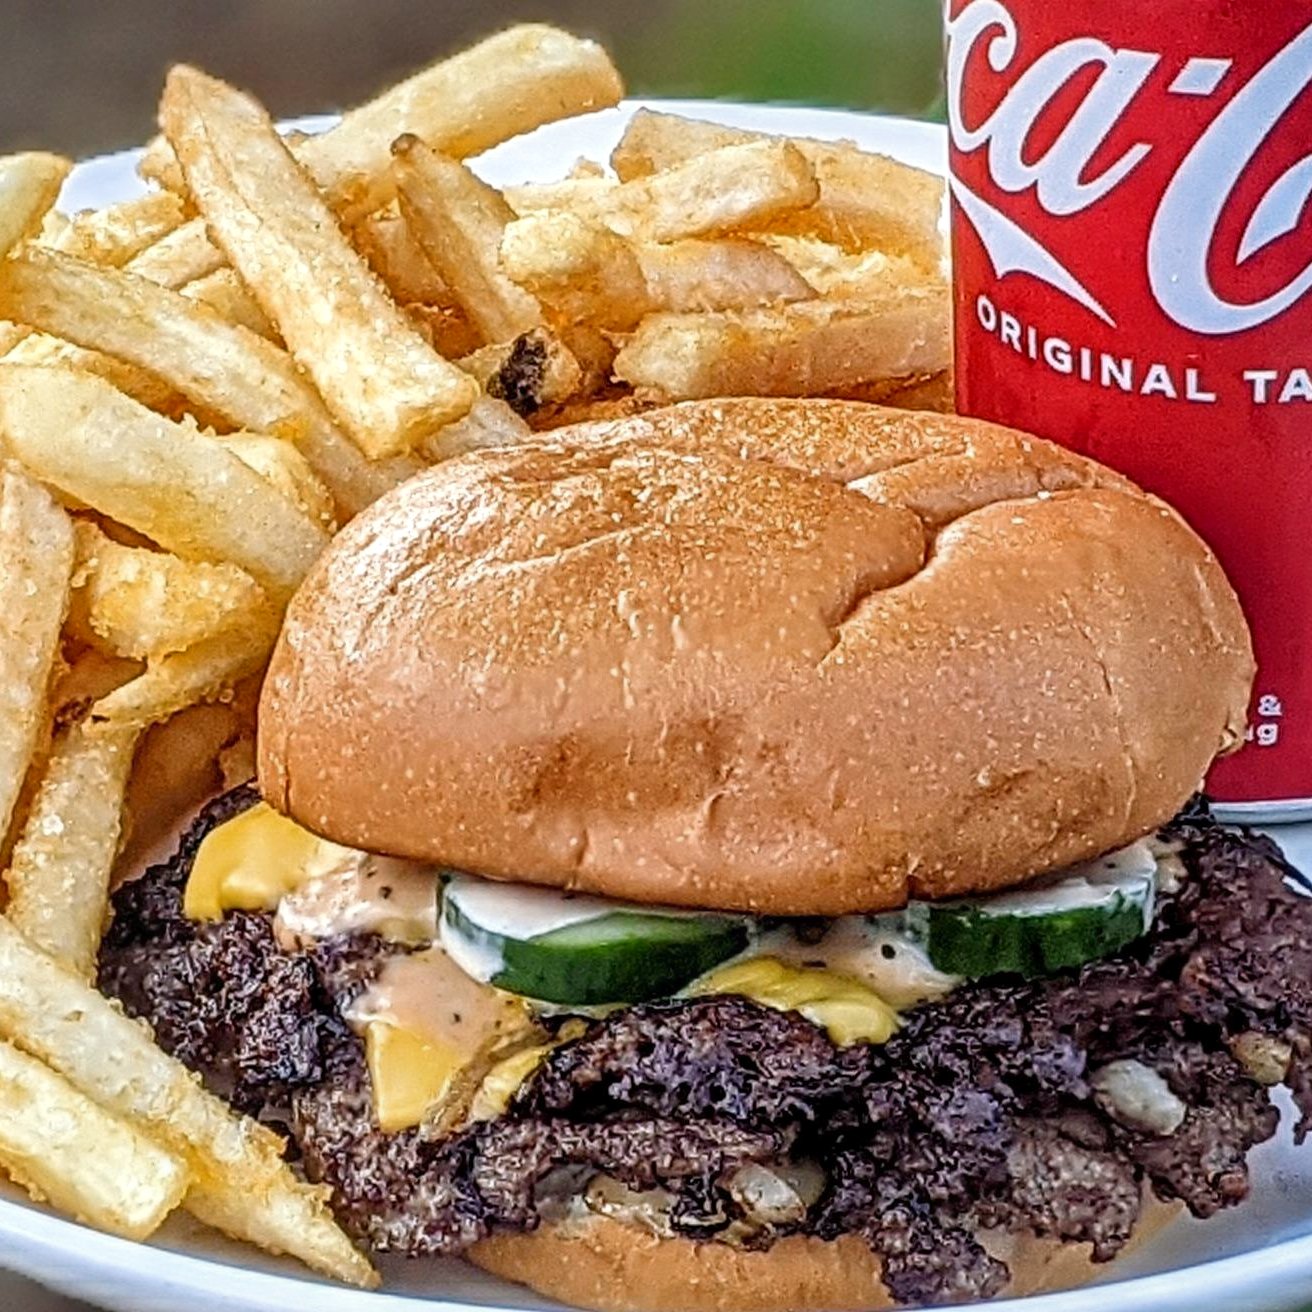 All-American Eats: Burgers, Fries, and More